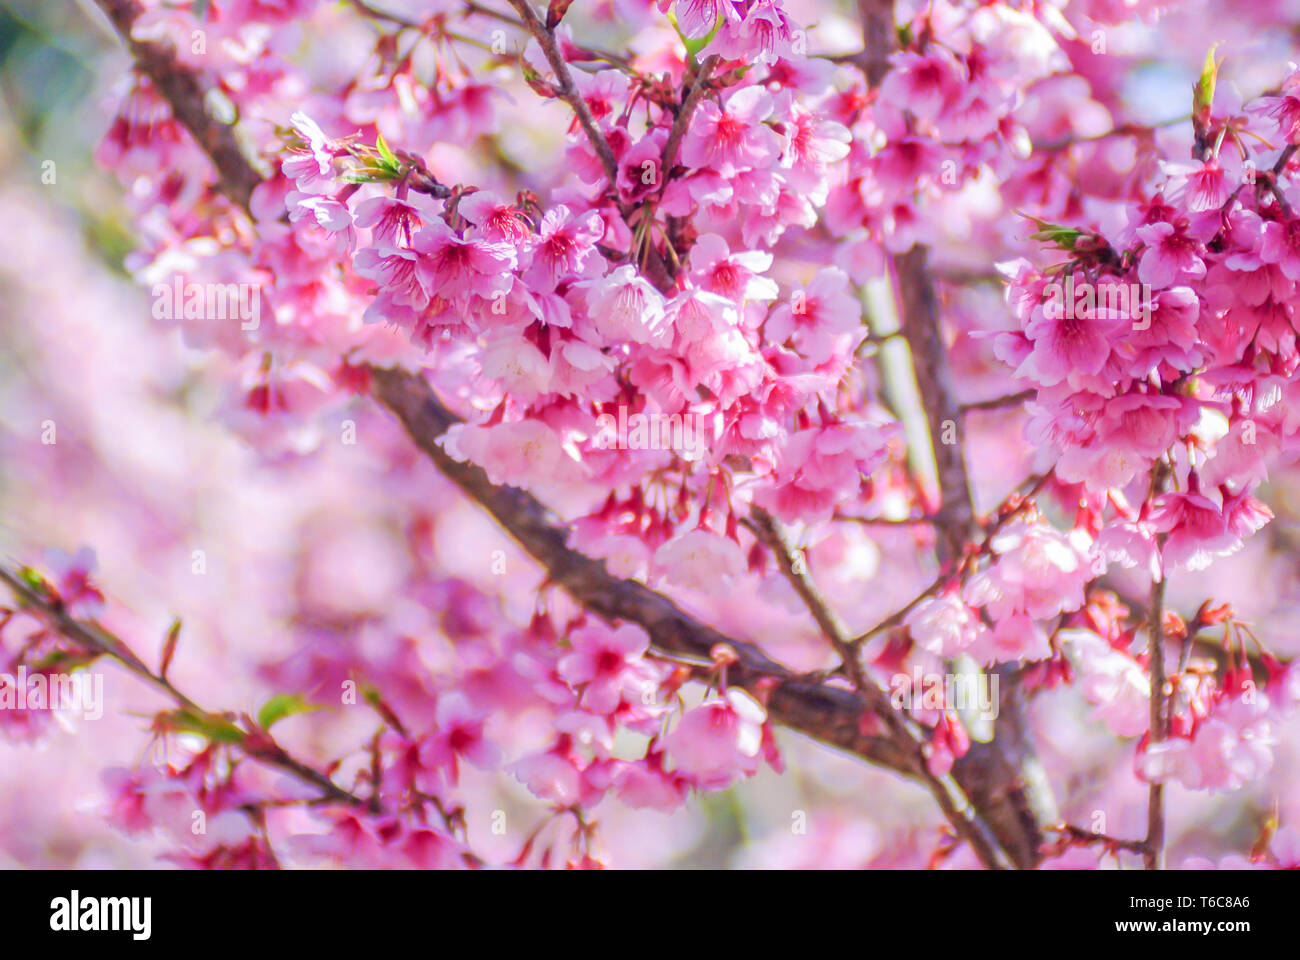 Spring time with beautiful cherry blossoms, pink sakura flowers. Stock Photo